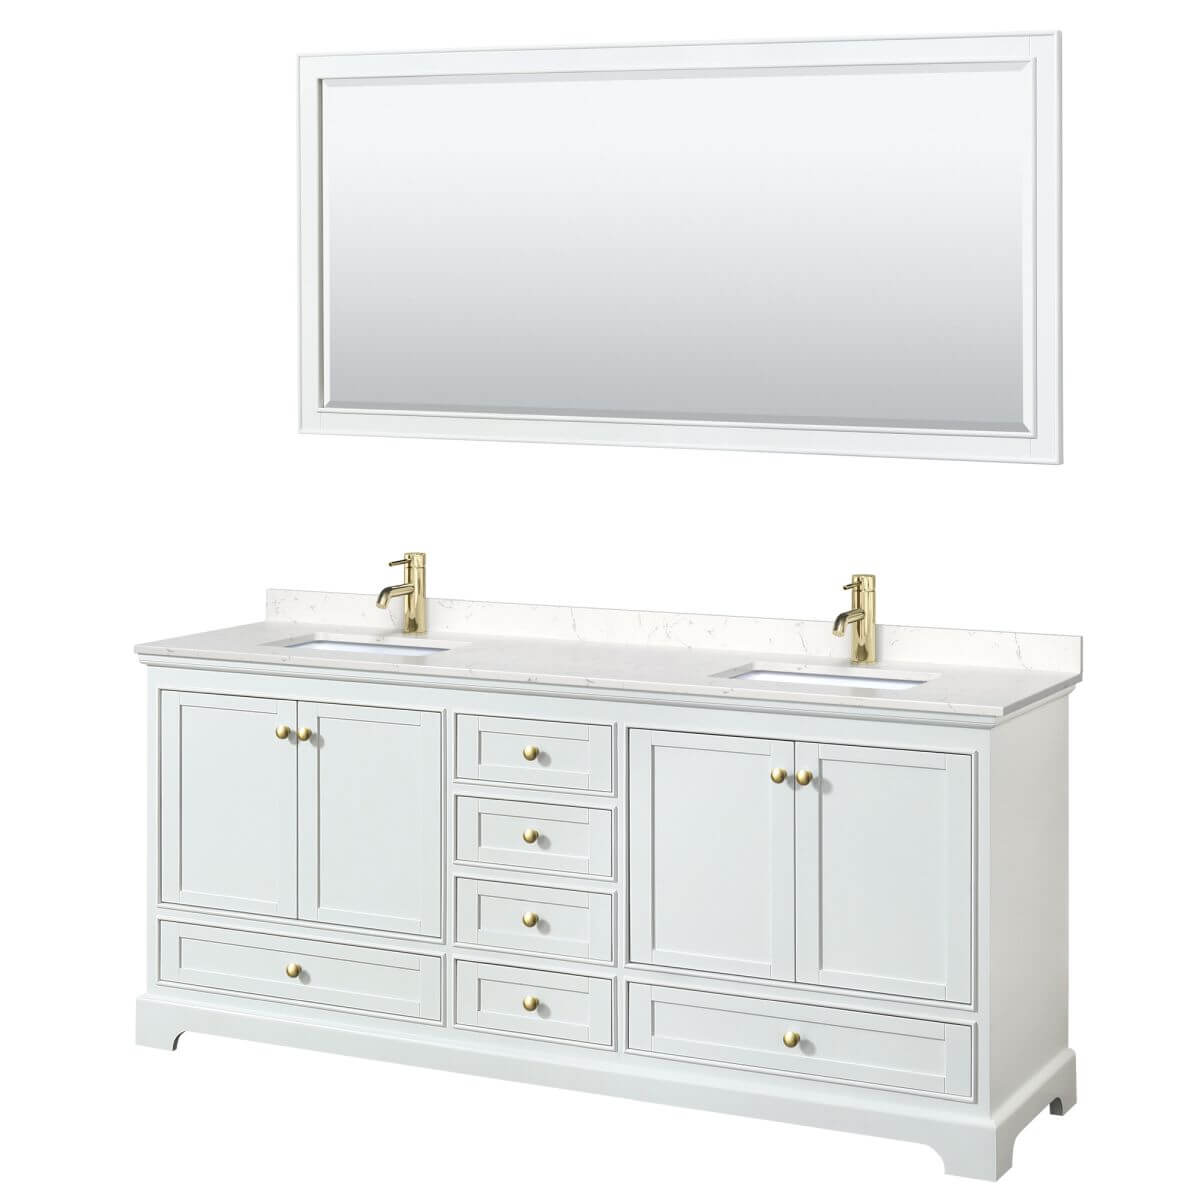 Wyndham Collection Deborah 80 inch Double Bathroom Vanity in White with Carrara Cultured Marble Countertop, Undermount Square Sinks, Brushed Gold Trim and 70 inch Mirror - WCS202080DWGC2UNSM70